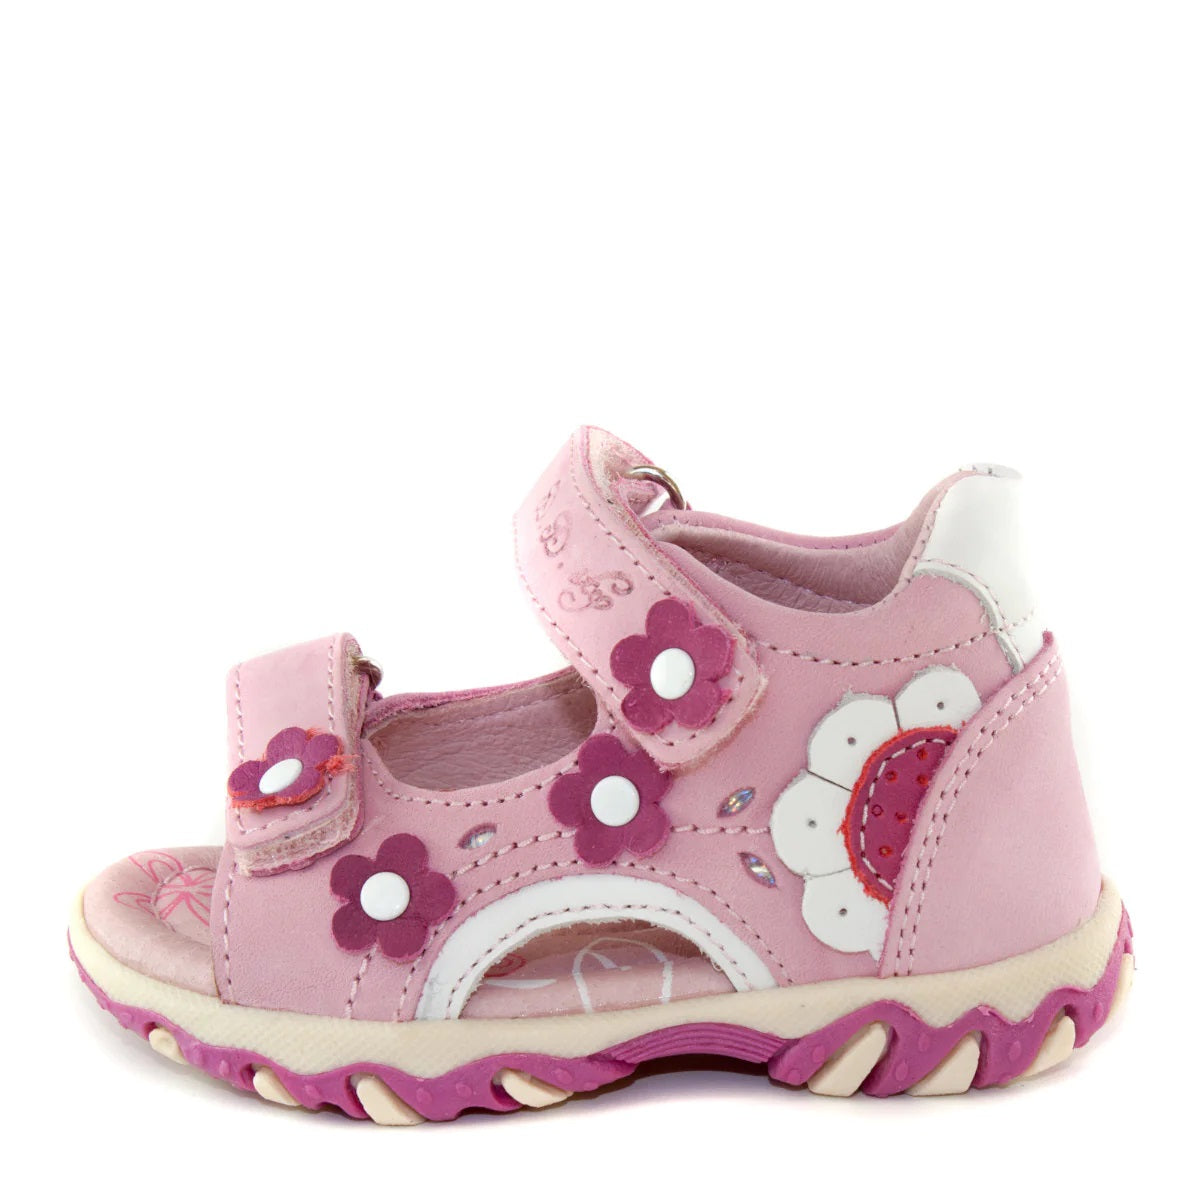 D.D. Step Girls Sandals Baby Pink With Flowers - Supportive Leather Shoes From Europe Kids Orthopedic - shoekid.ca